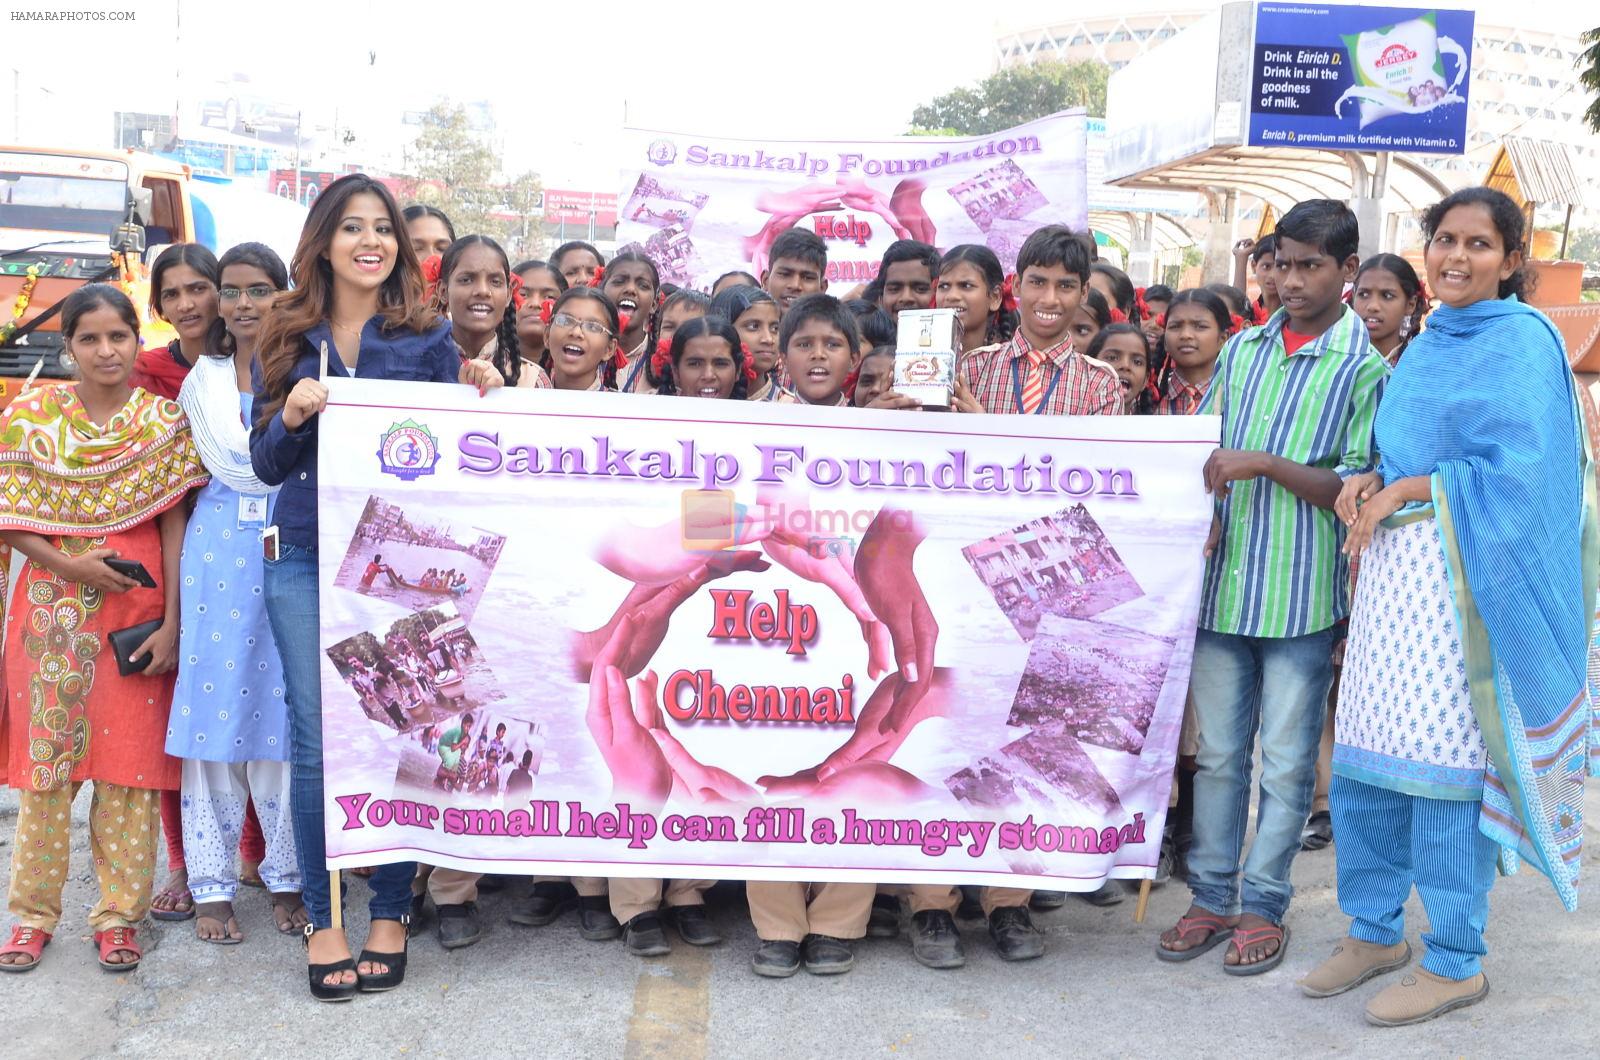 Manali Rathod has joined hands with Sankalp Foundation to raise funds for Chennai flood victims